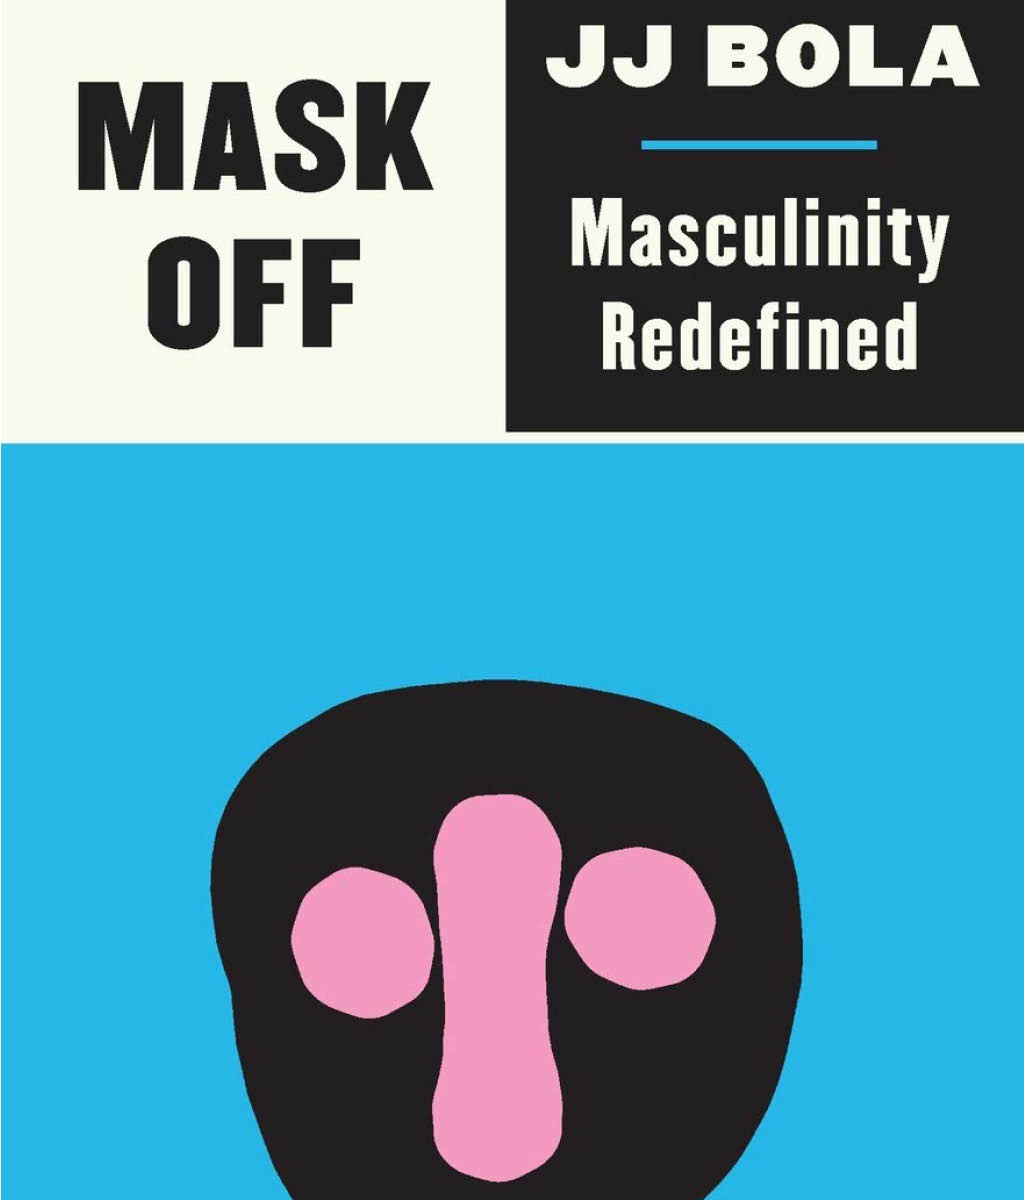 Mask Off : Masculinity Redefined by JJ Bola